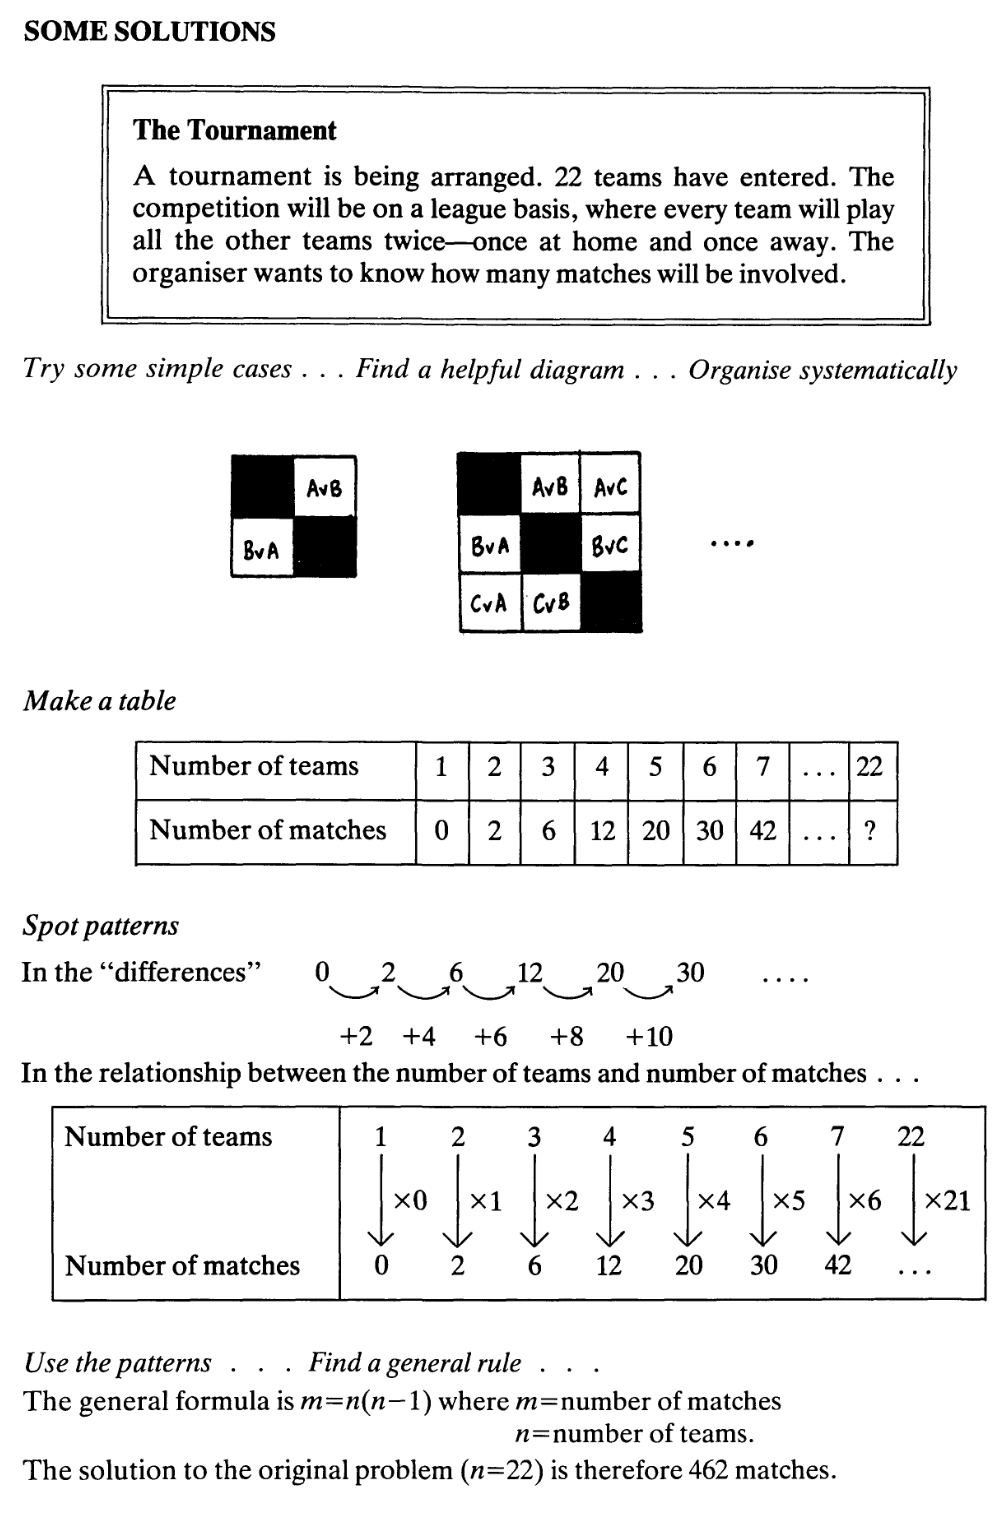 Example page from 'Problems with Patterns and Numbers'